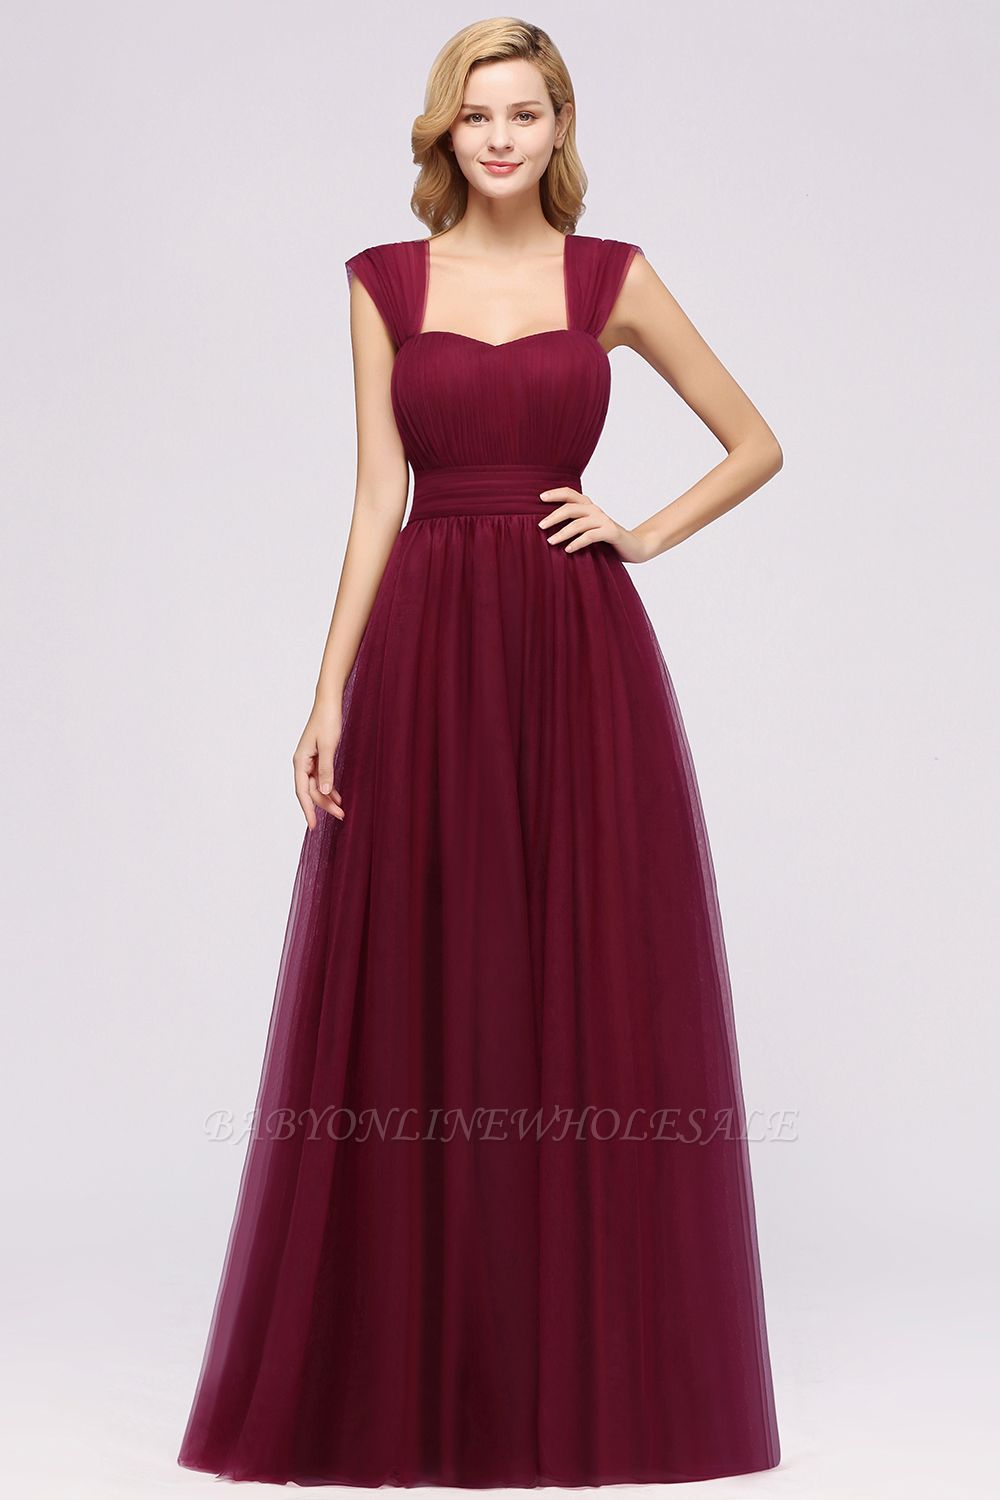 A-Line Popular Sweetheart Straps Sleeves Floor-Length Bridesmaid Dresses with Ruffles